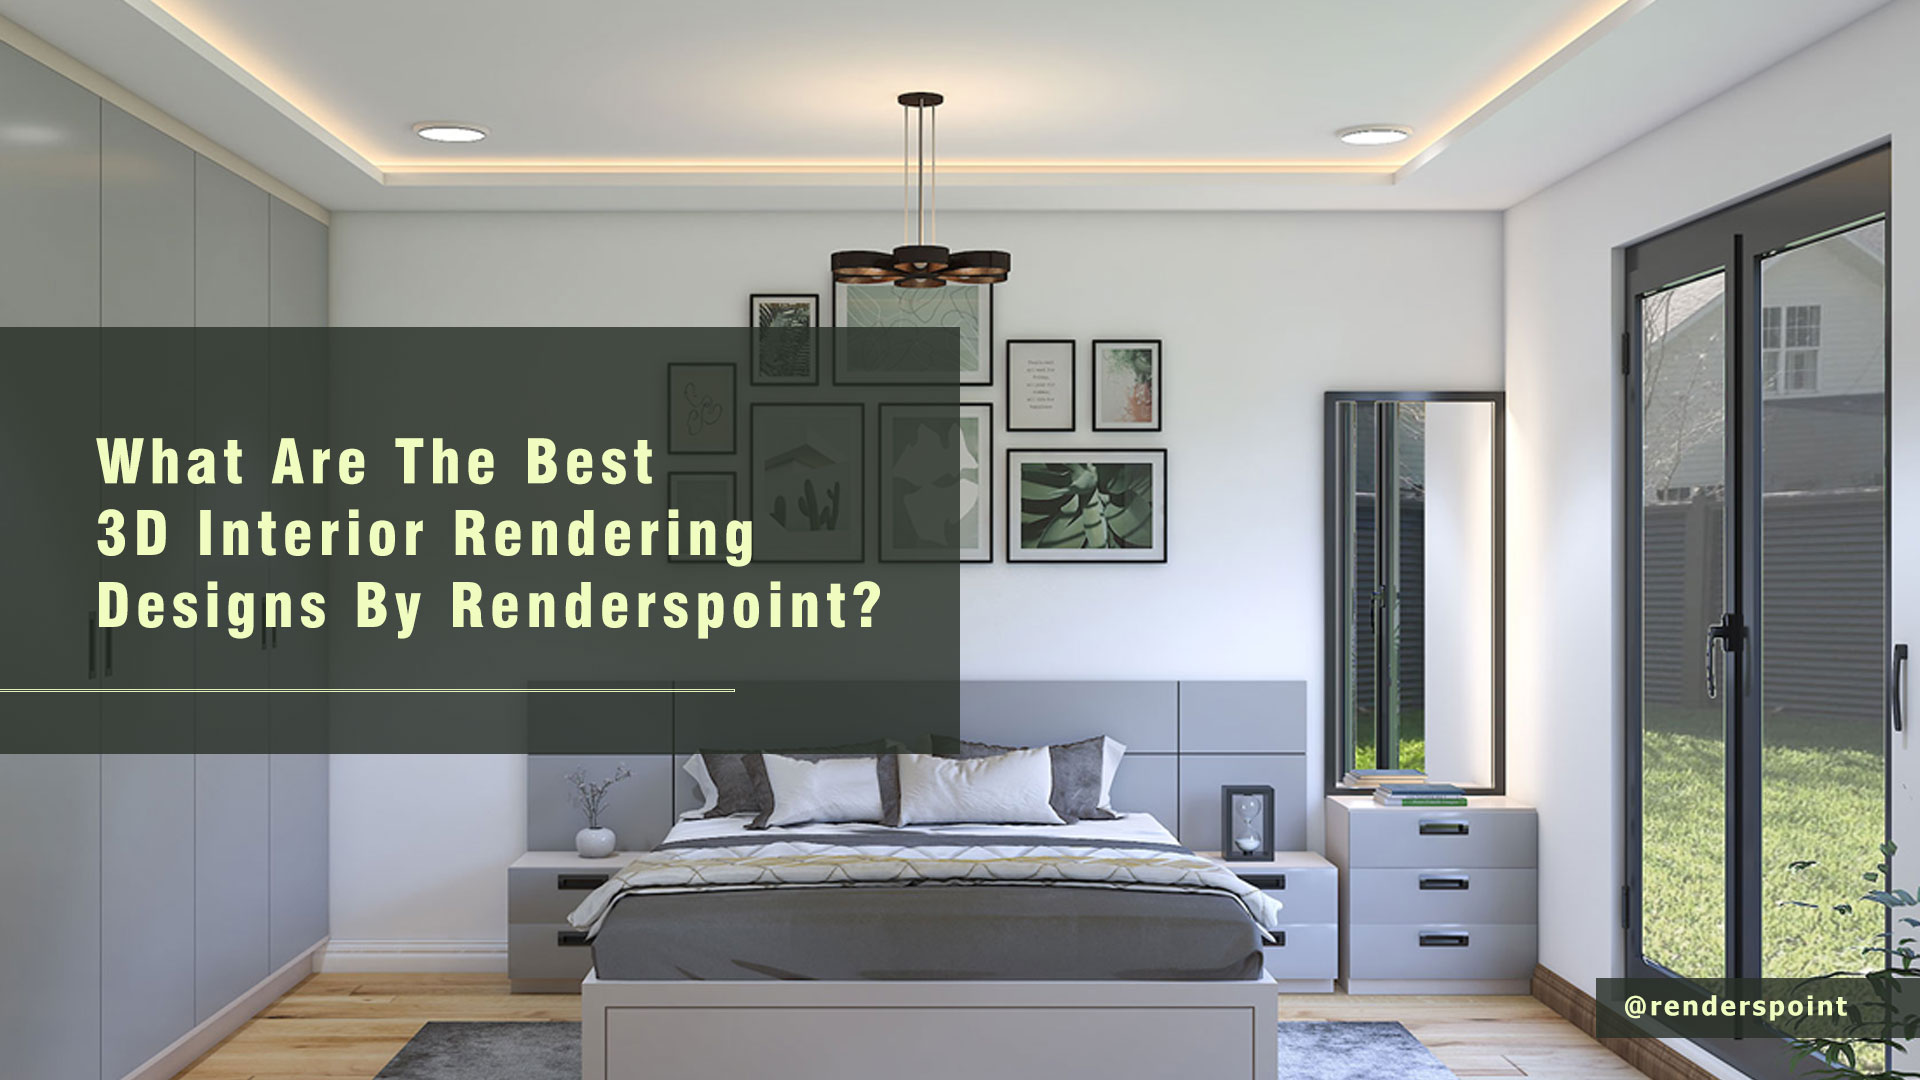 What are the best 3D Interior Rendering Designs by Renderspoint?